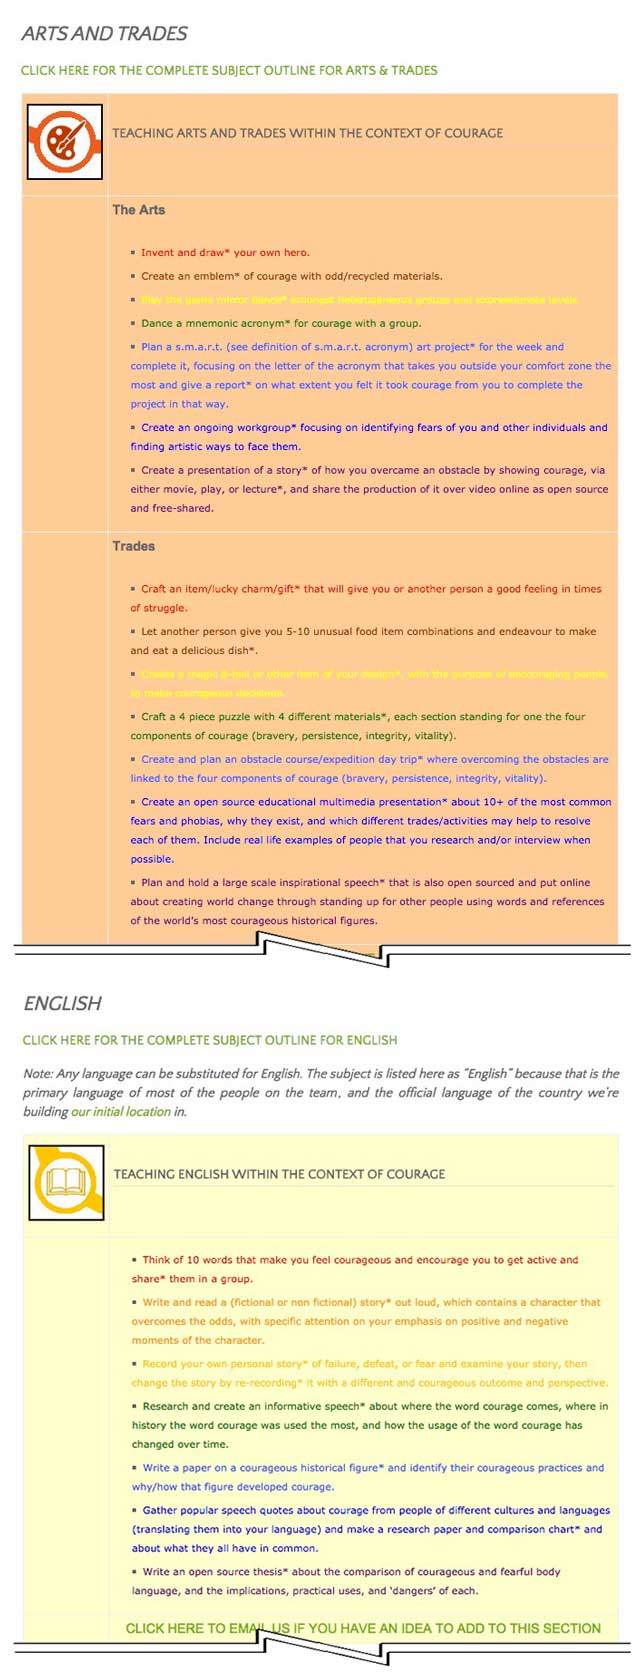 How Humanity Creates a Sustainable World, This last week the core team transferred the first 25% of the written content for the Courage Lesson Plan to the website, as you see here. This lesson plan purposed to teach all subjects, to all learning levels, in any learning environment, using the central theme of "Courage" is now 25% completed on our website.